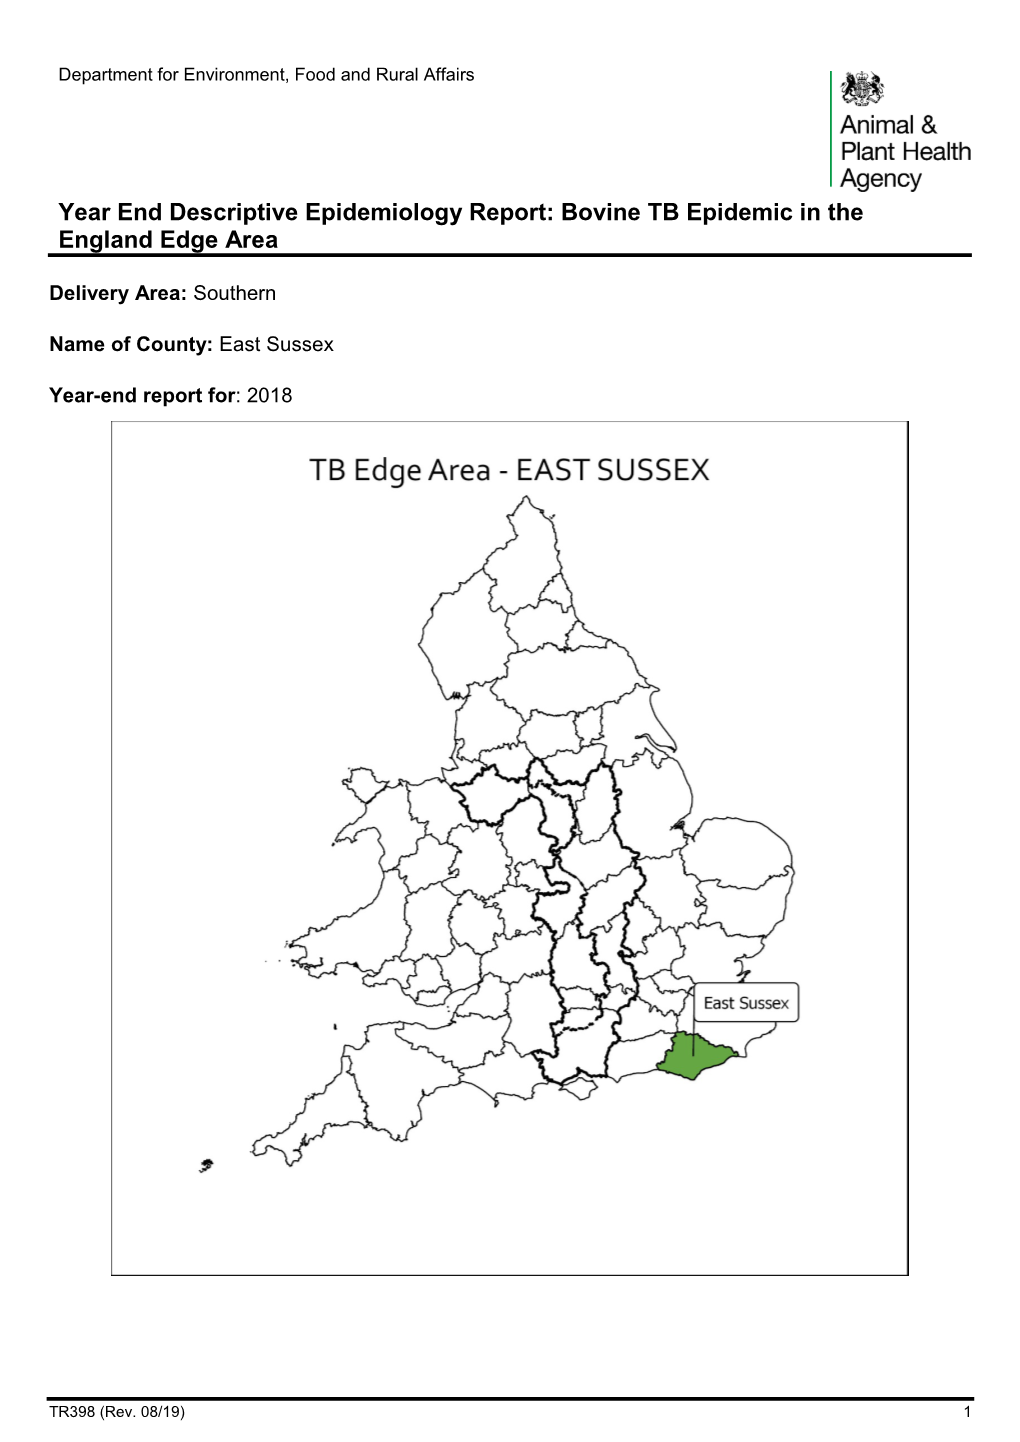 East Sussex (Edge Area) Year-End Report 2018